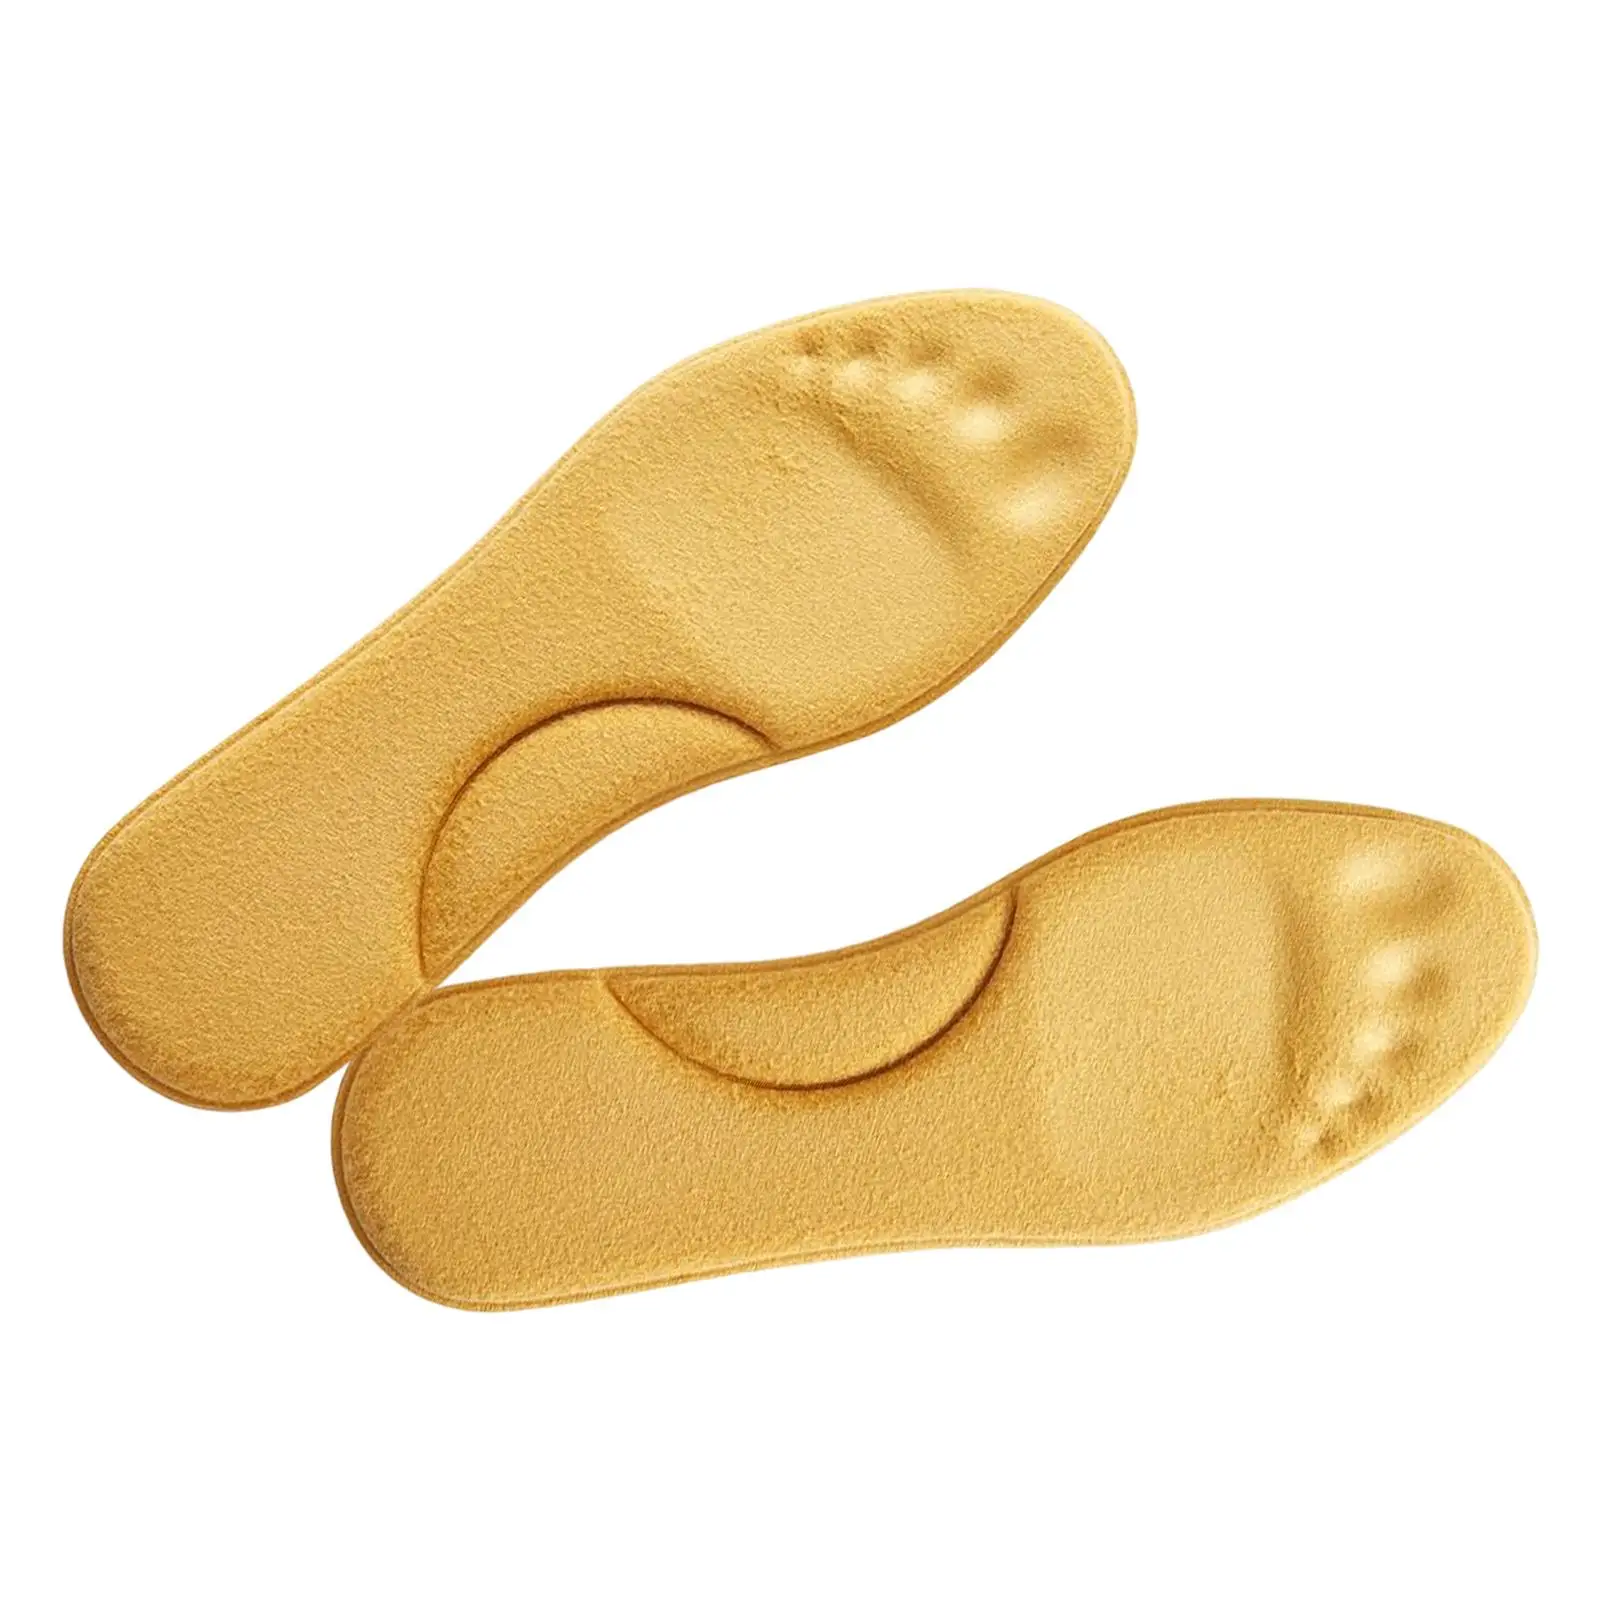 Self Heated Thermals Warm Keeping for Feet No Need to Charge Washable Memory Foam Sponge